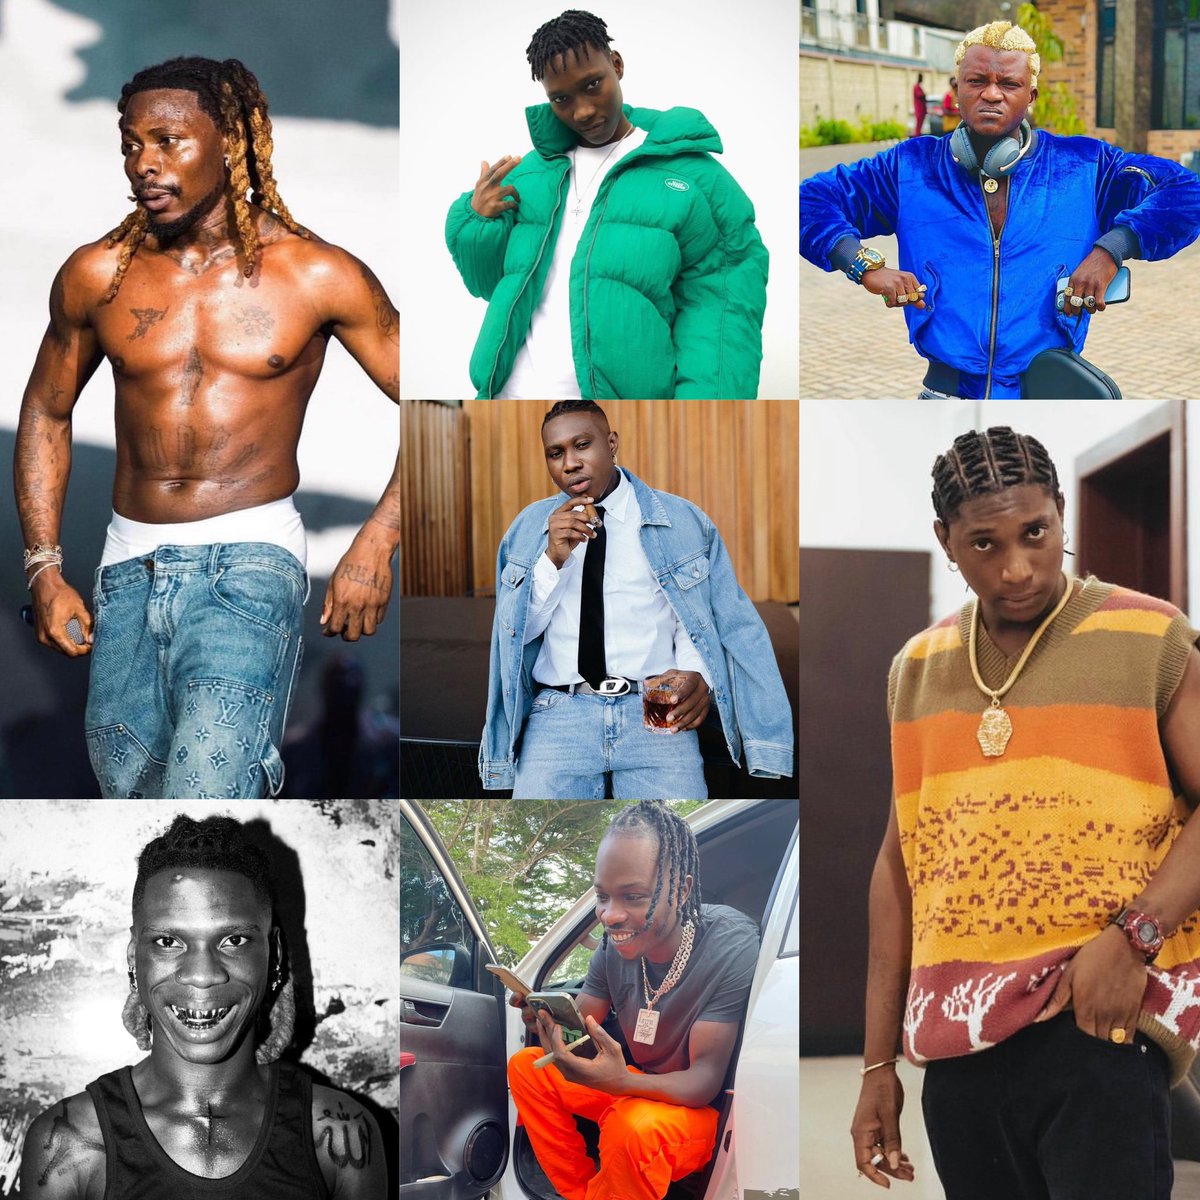 You need to organise a street carnival but you can only bring ONE of these artistes ! 
Who are you choosing???